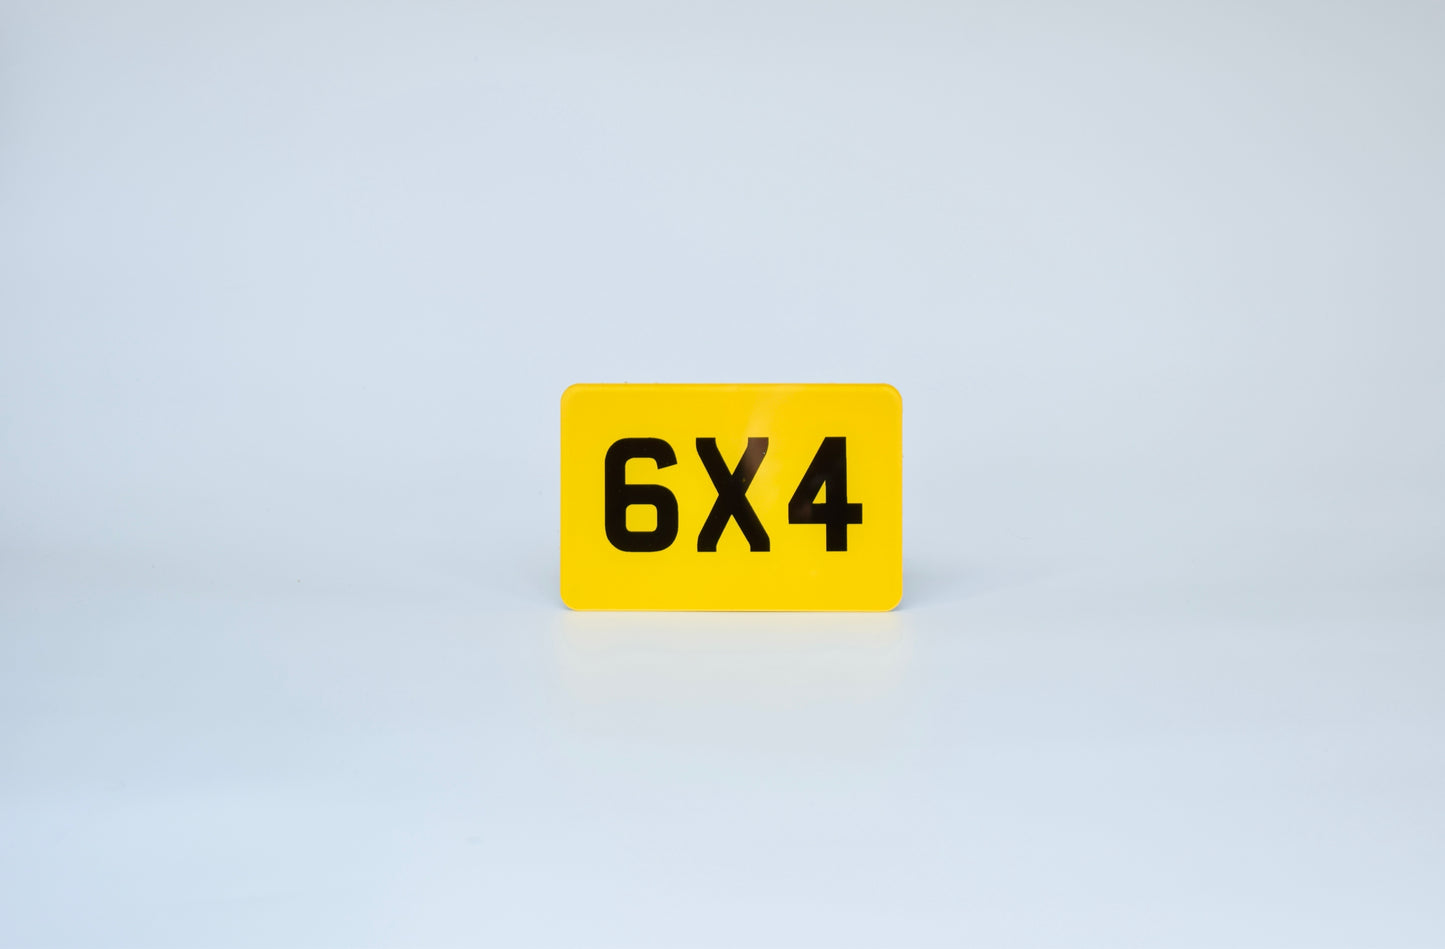 Acrylic 6 x 4 Motorcycle Number Plate